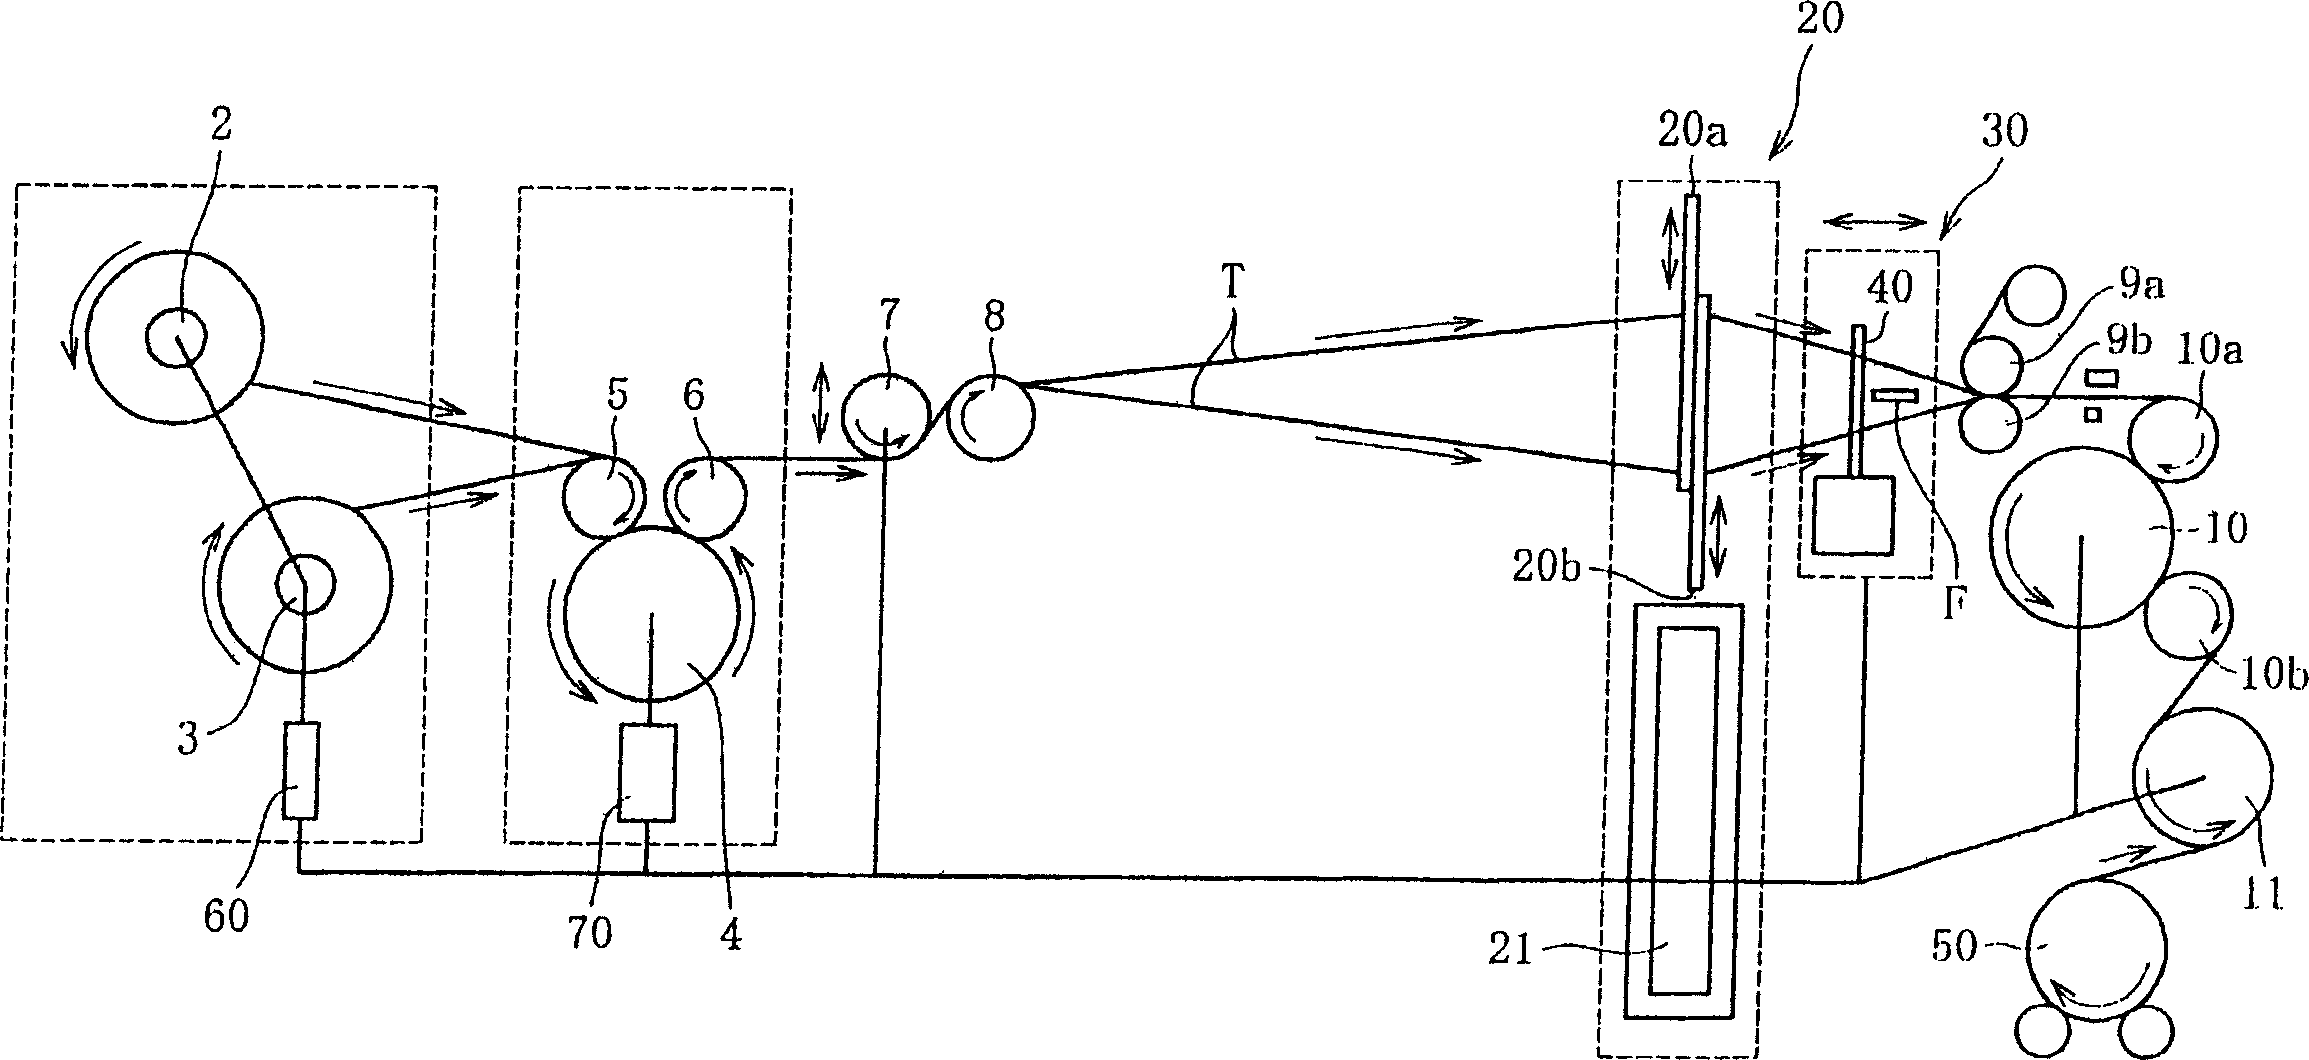 Device and method for weaving band shaped fibre beam fabrics